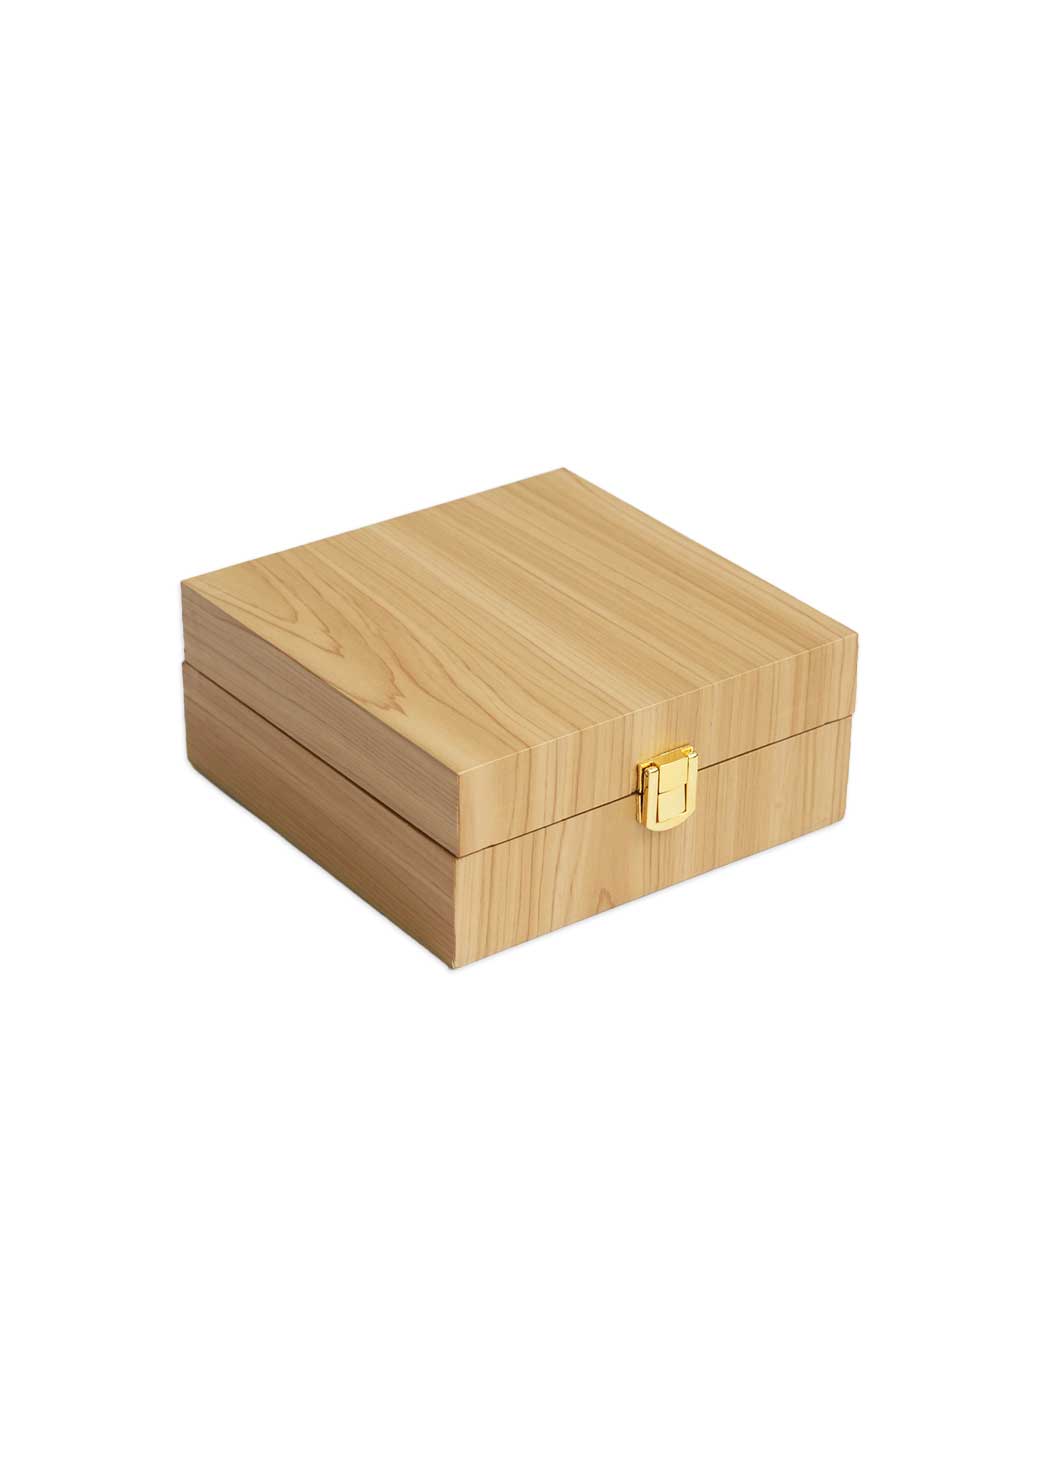 Premium Wooden Box | Square Shape Wooden Box | Wedding Ring Box | Wedding gift for married couple Couples witnesses | Bidhbox